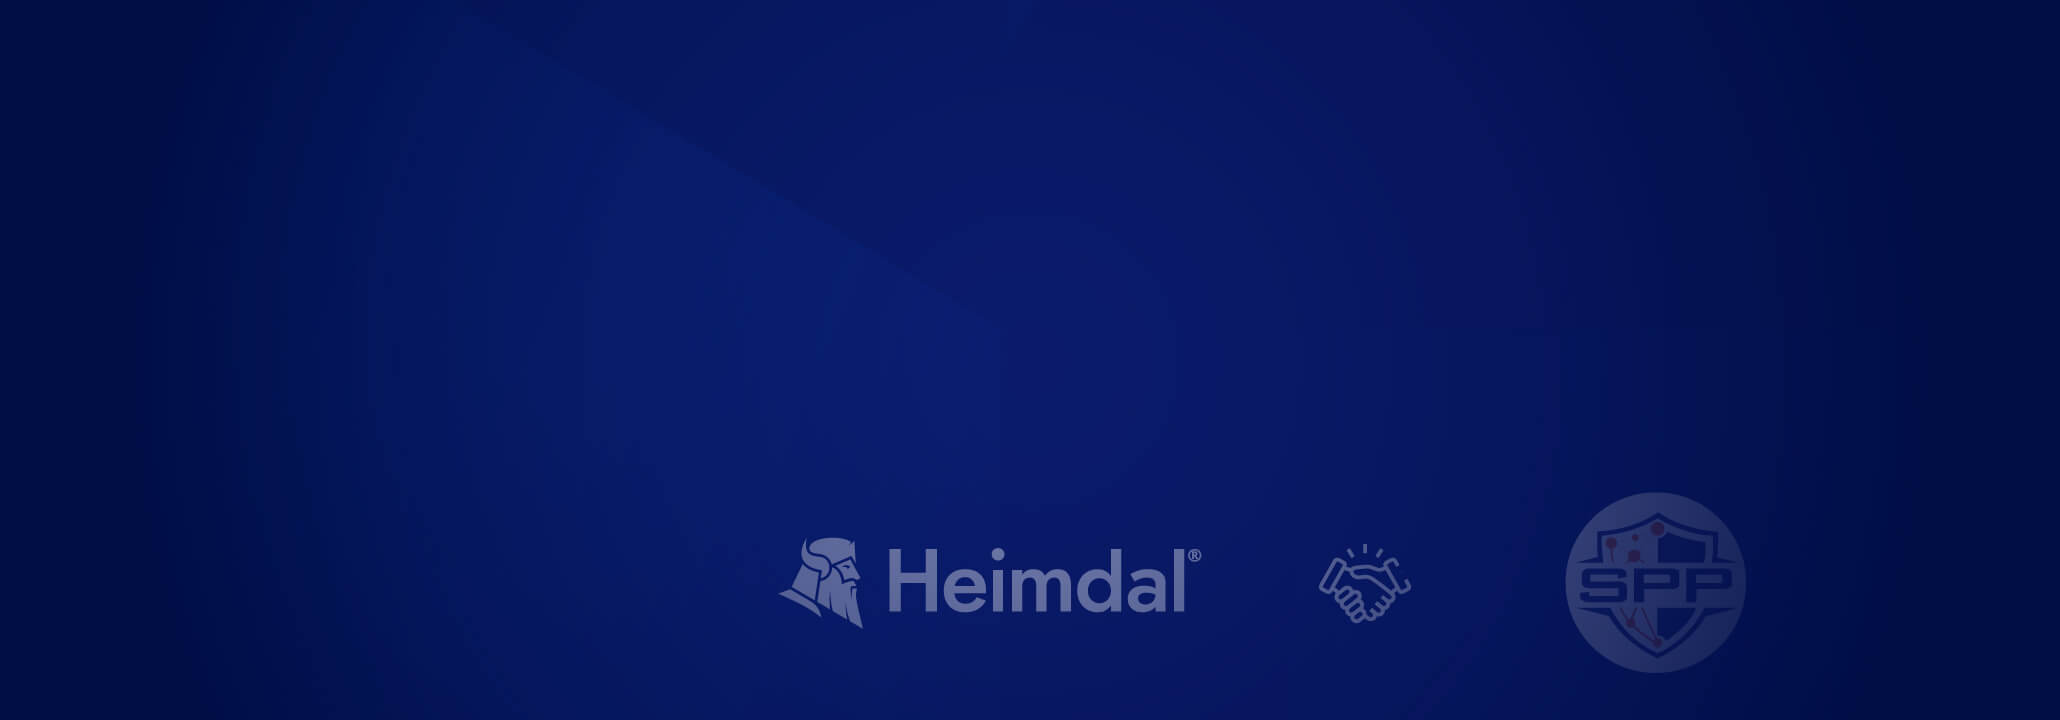 Heimdal and SPP Join Forces to Deliver Award-Winning Unified Security Capabilities to US Service Providers